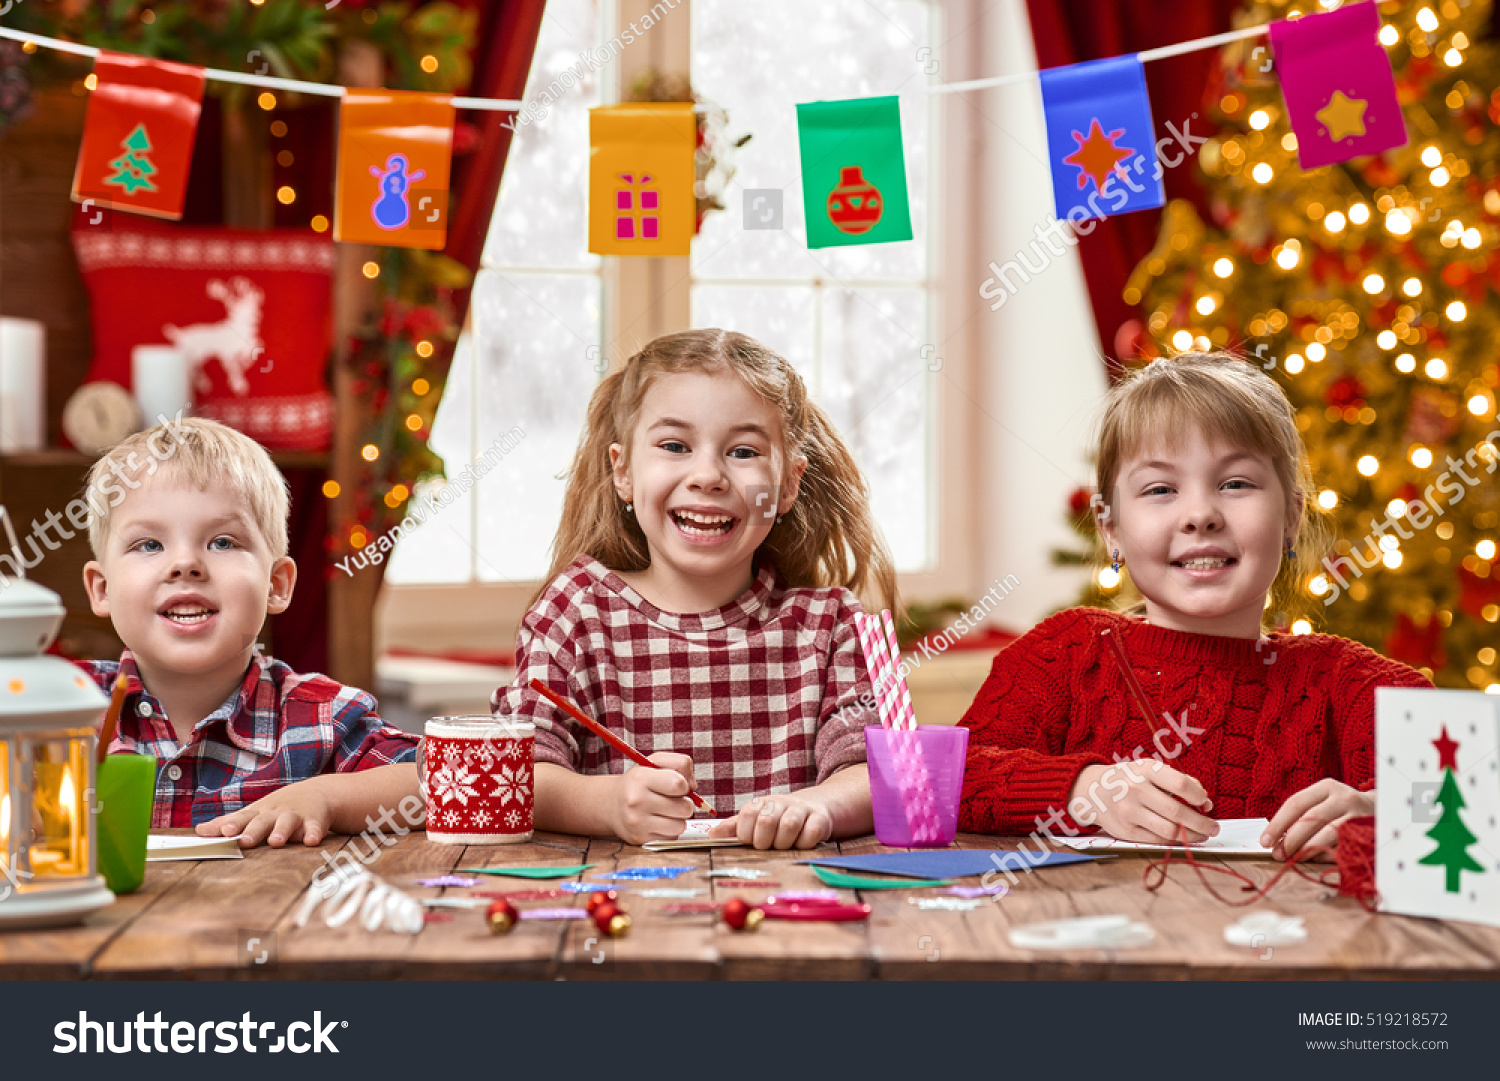 Merry Christmas and Happy Holidays. Adorable little children make cards, gifts and decorations for the holiday. Cute kids are engaged in creativity. #519218572